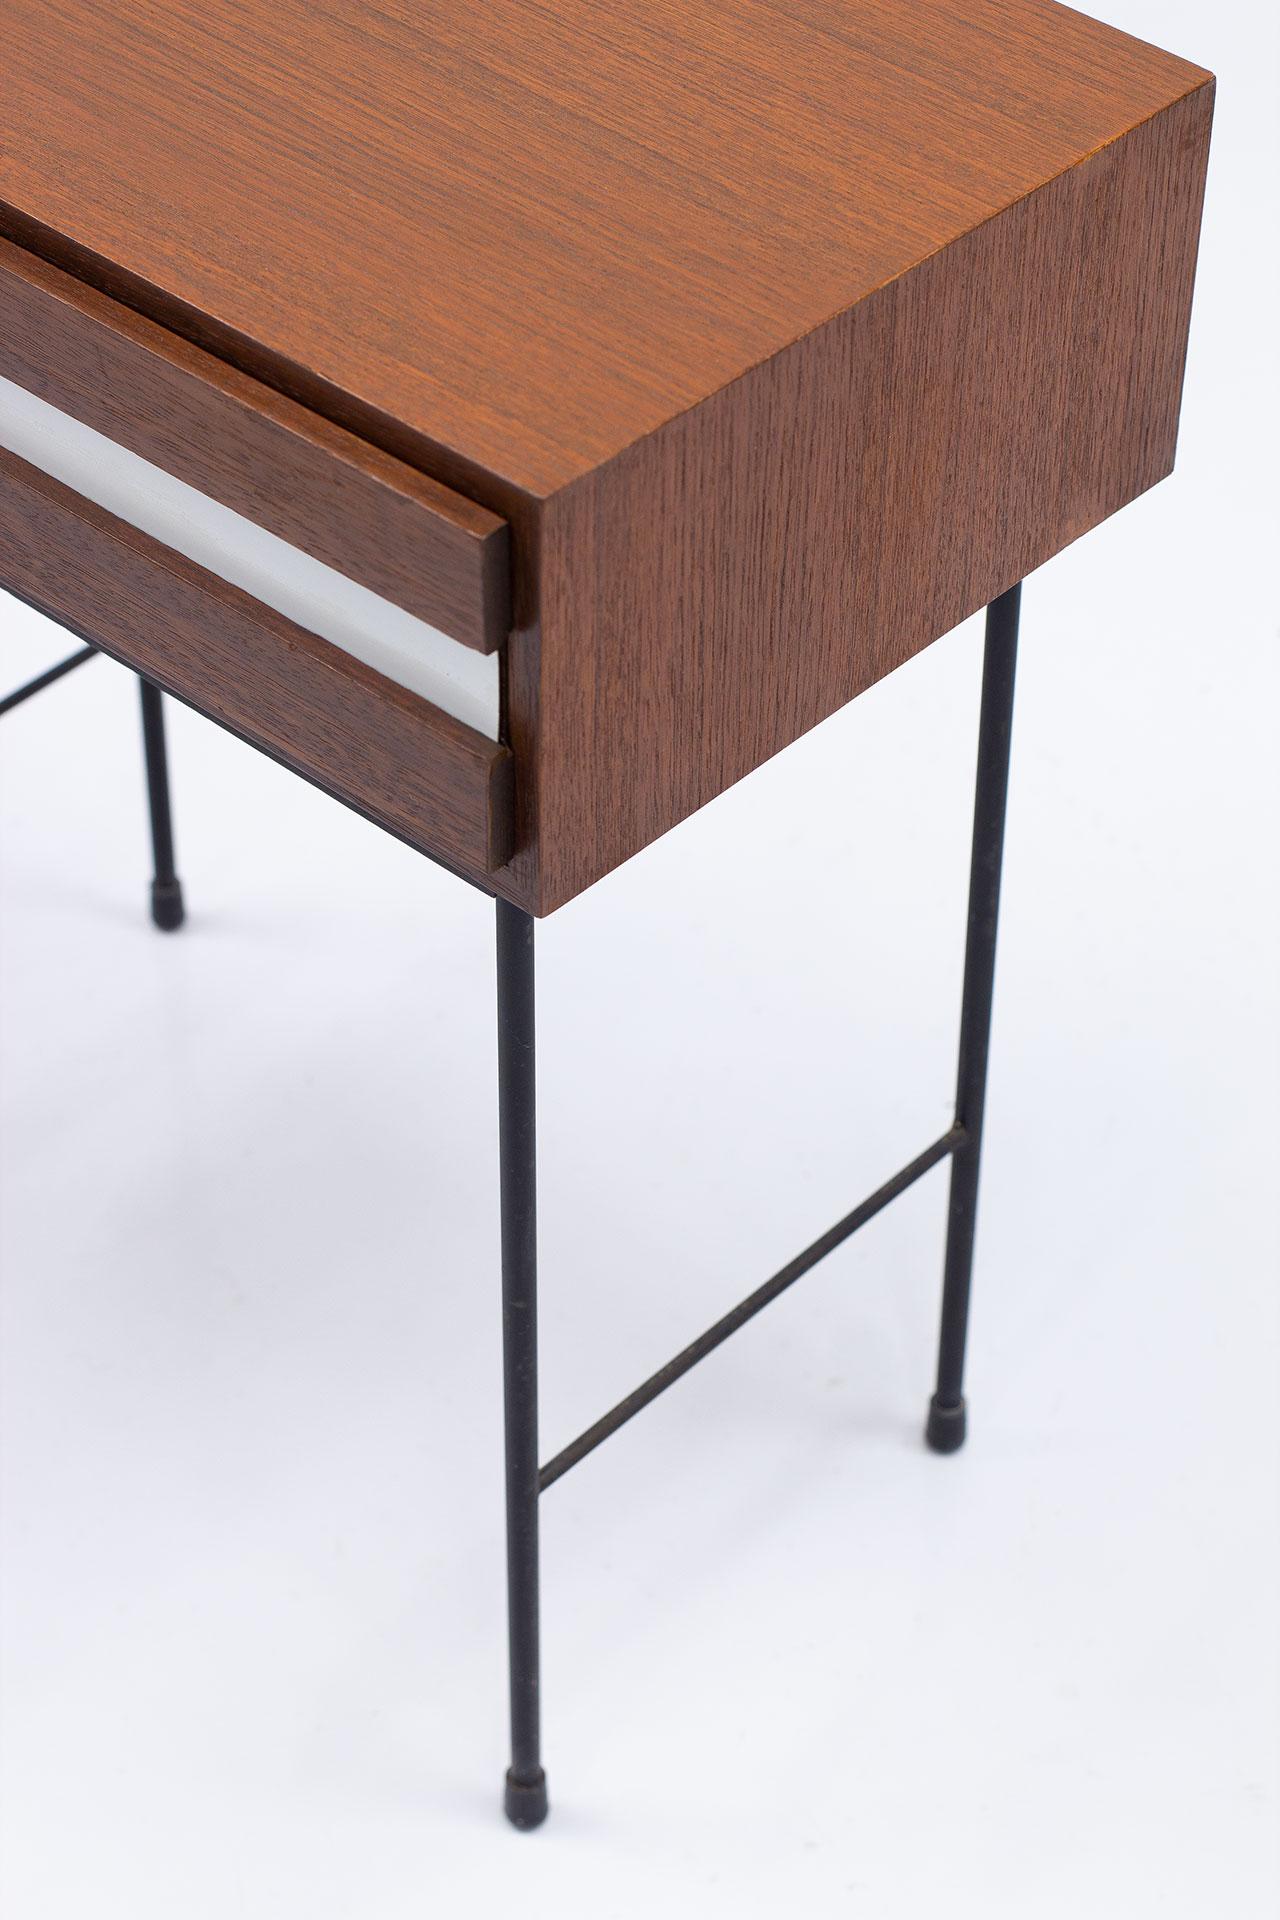 Swedish Side Table by Hans-Agne Jakobsson, 1950s For Sale 2